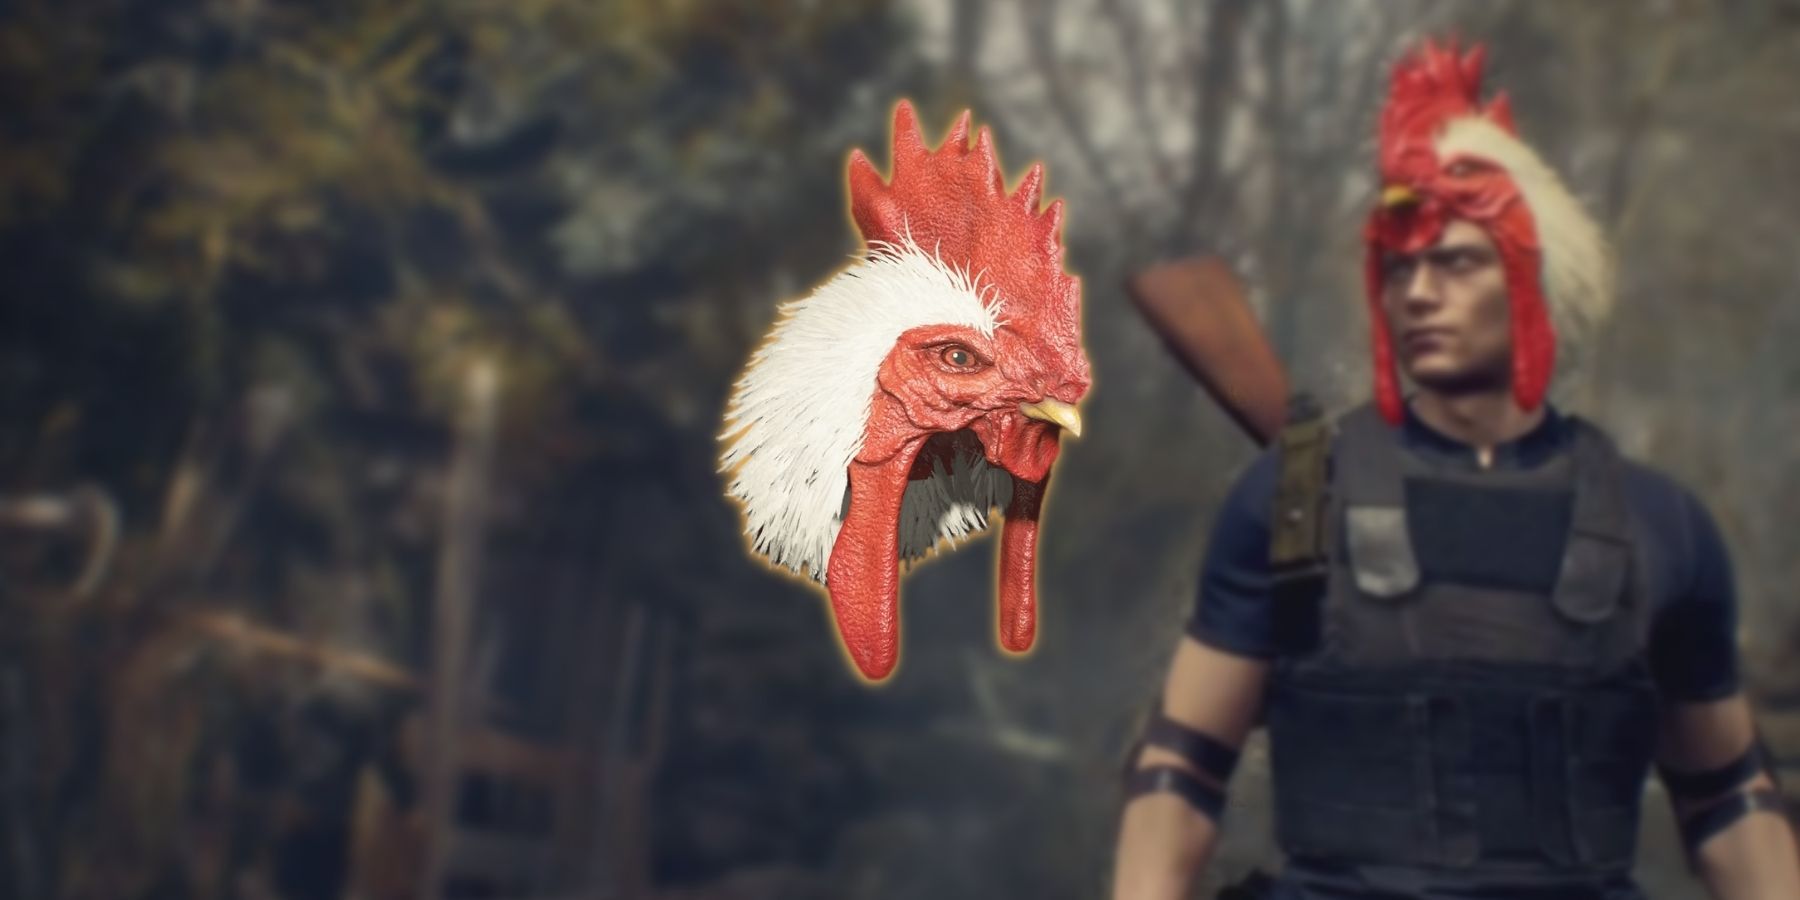 image showing the chicken hat in the resident evil 4 remake.